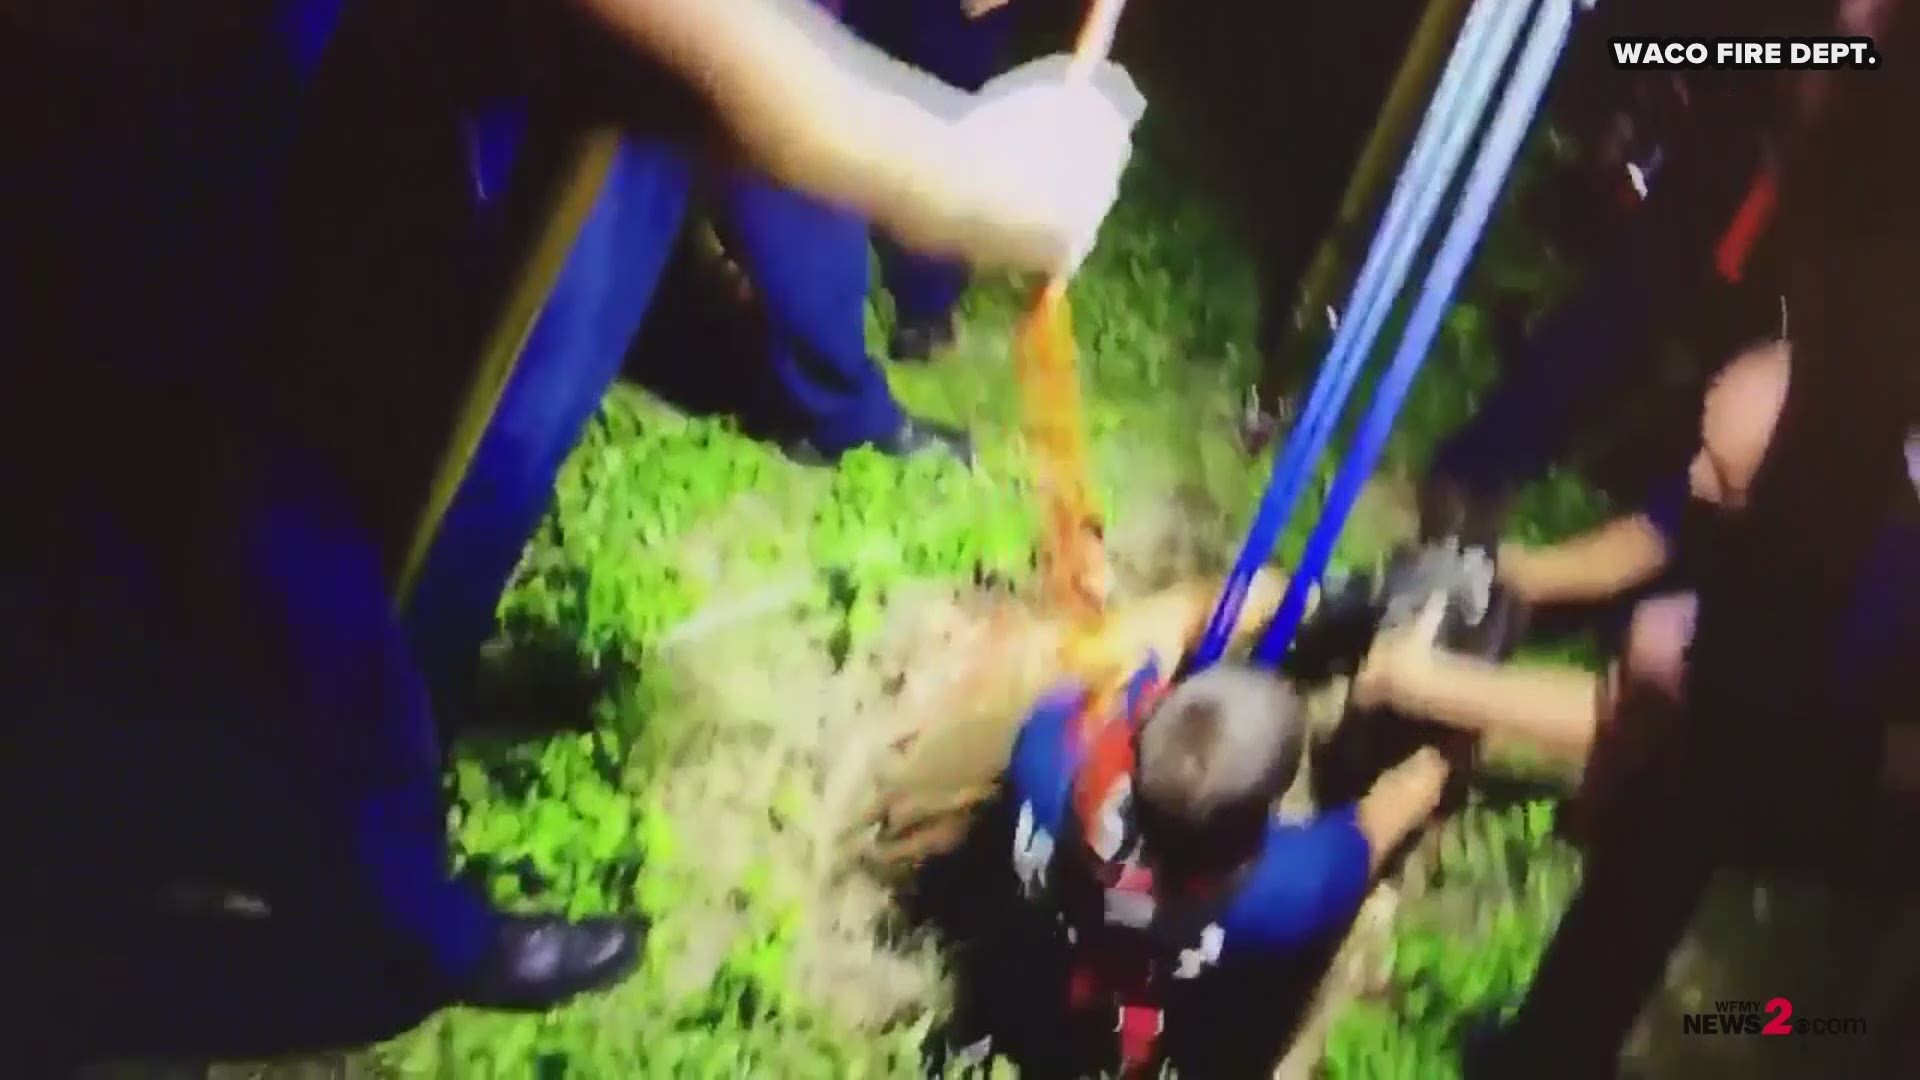 It was an eventful night for the Waco, TX Fire Department. The rescue team was called to rescue a dog stuck in an abandoned well. Hazel became trapped in a 30 ft. deep well.